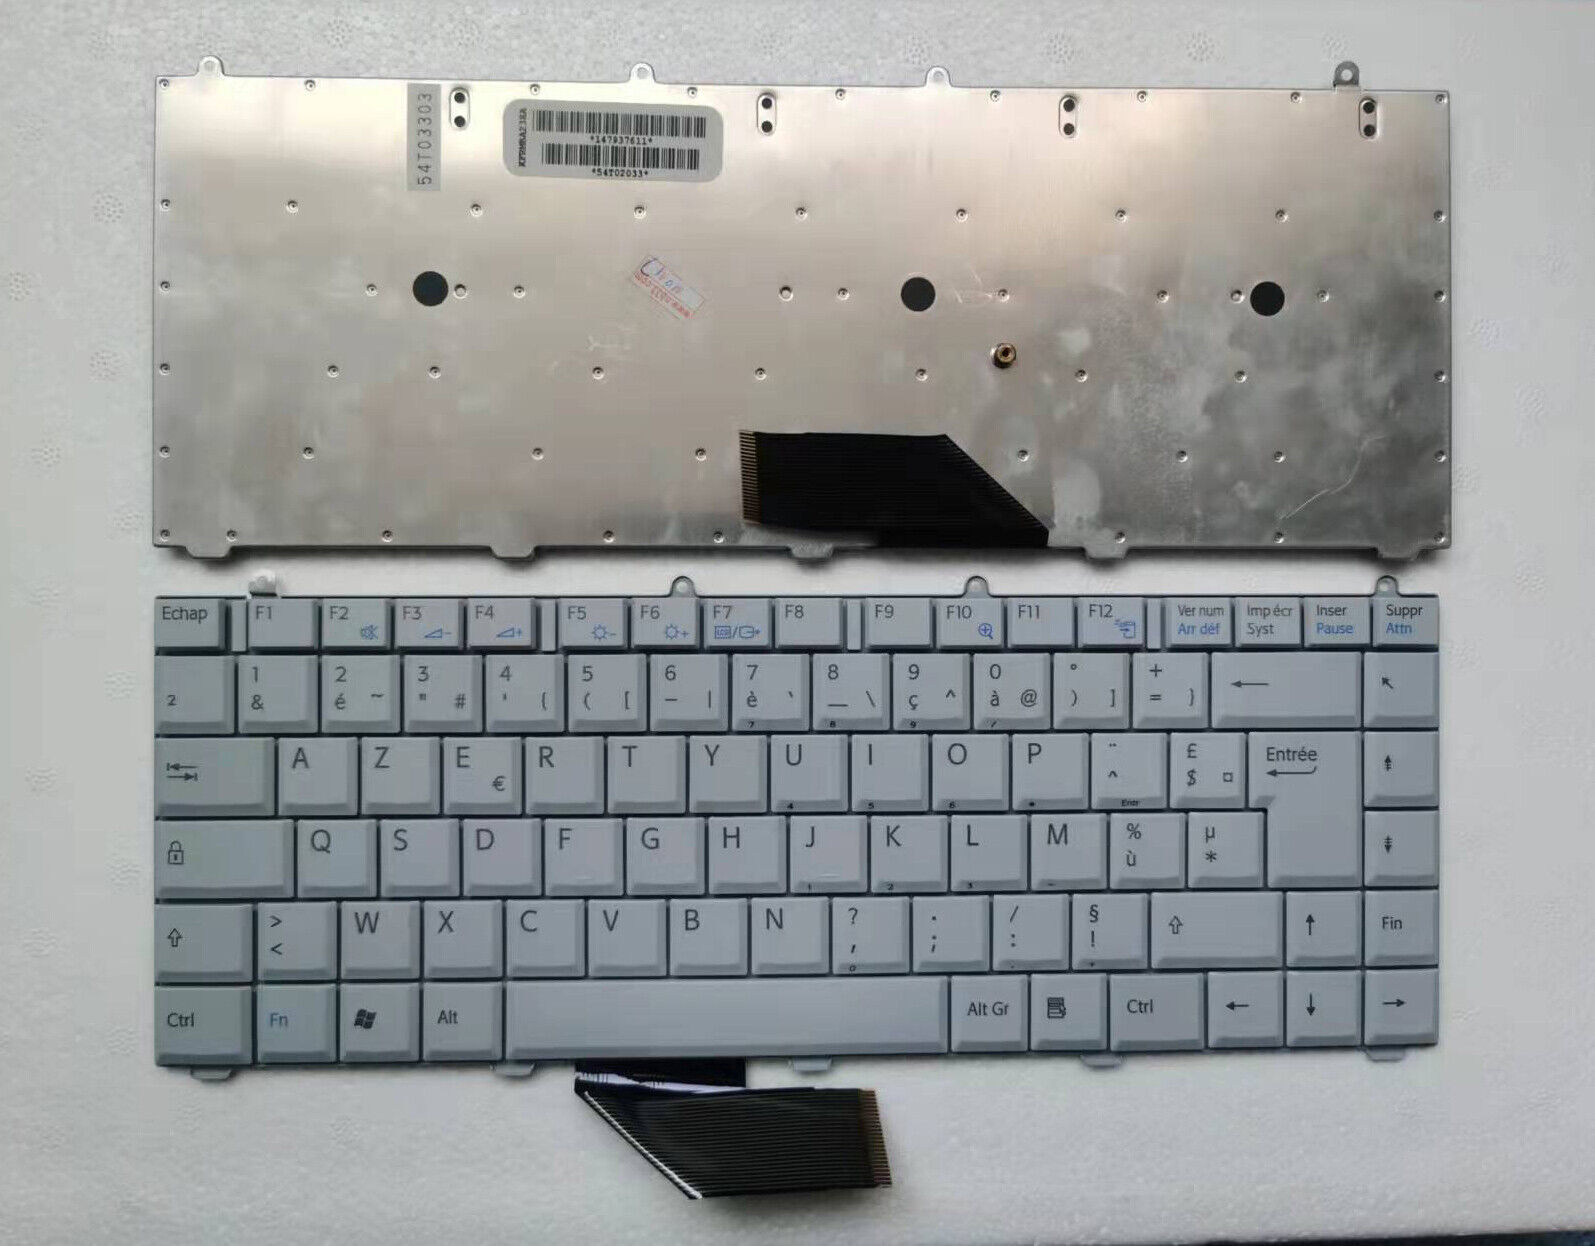 Laptop Keyboard NEW FOR SONY Vaio VGN-FS VGN-FS550 FS660 FS790 PCG-7G1M